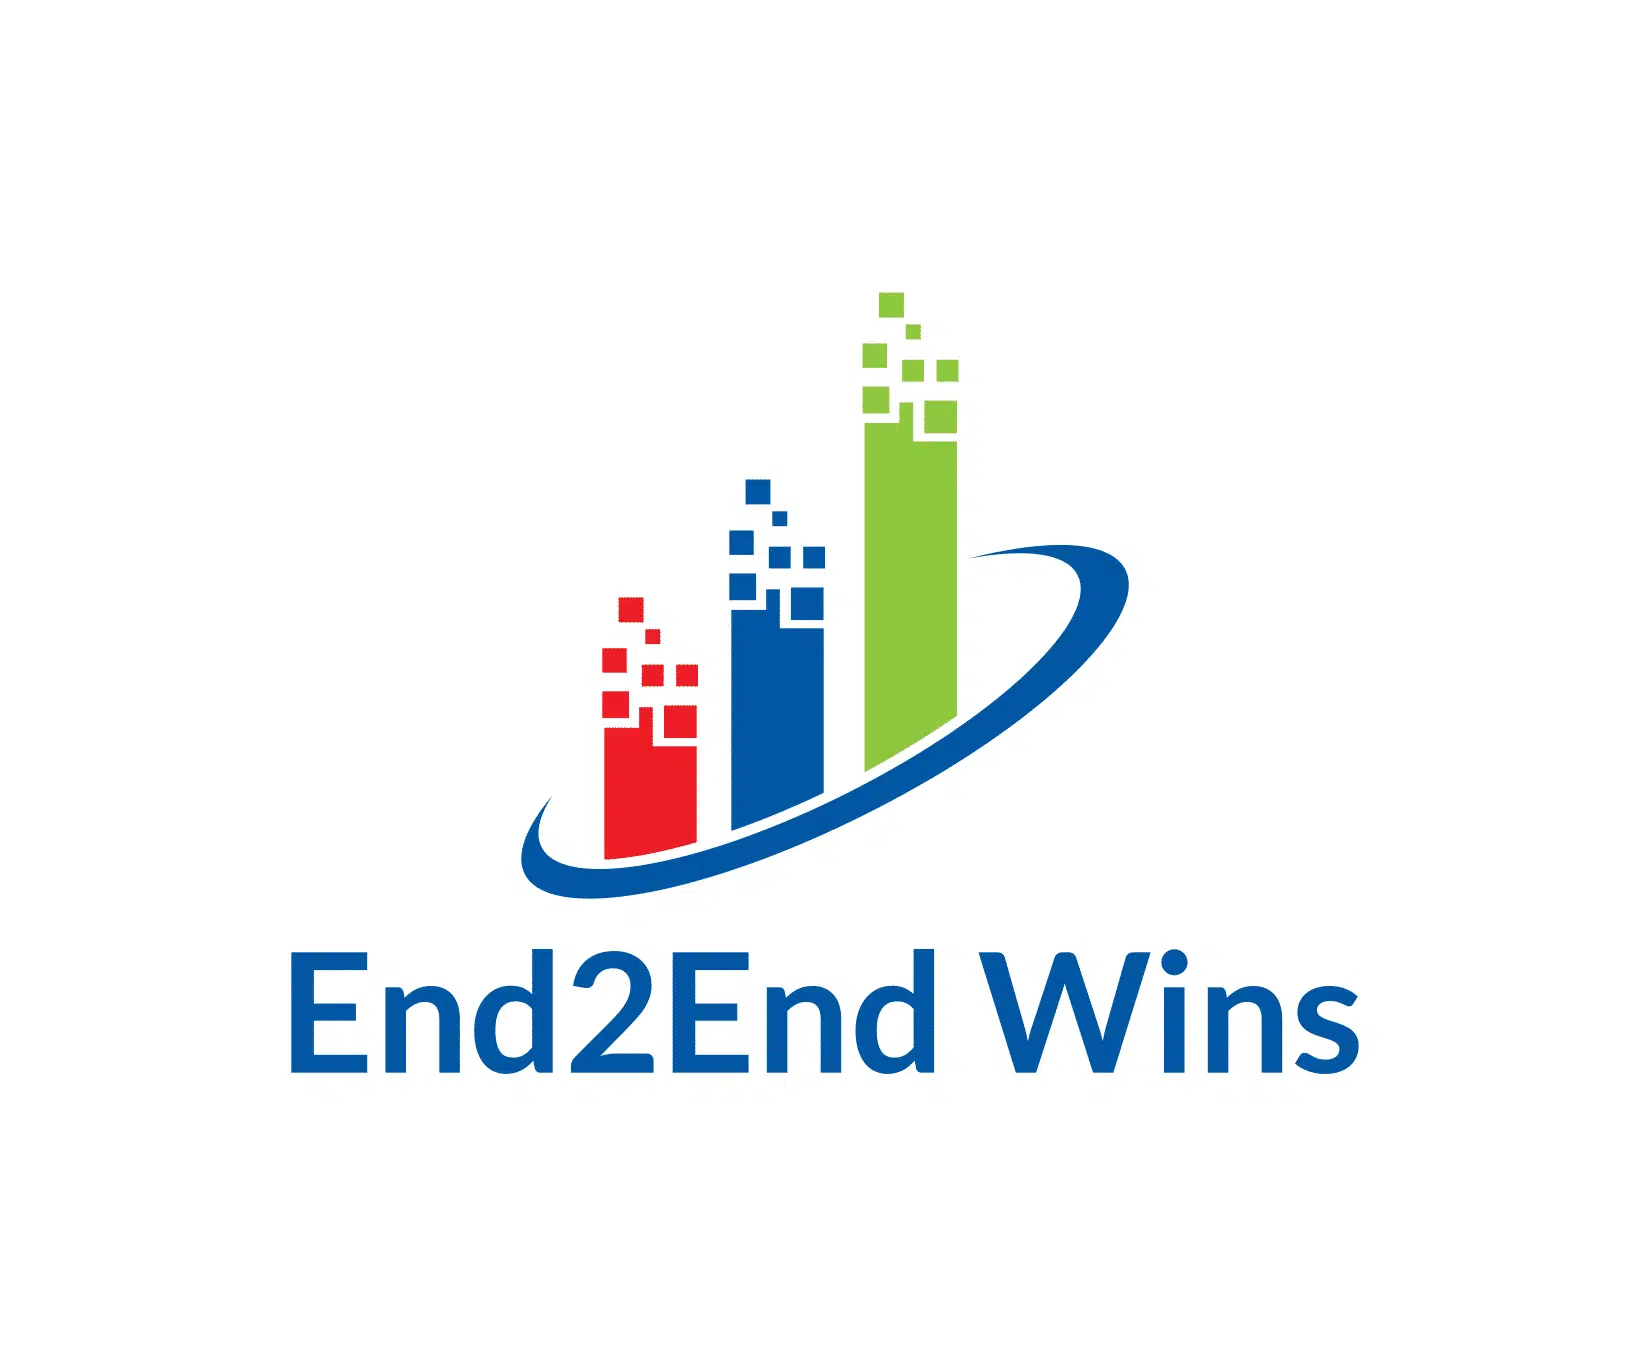 End2End Wins logo reflecting explosive growth in vertical bars